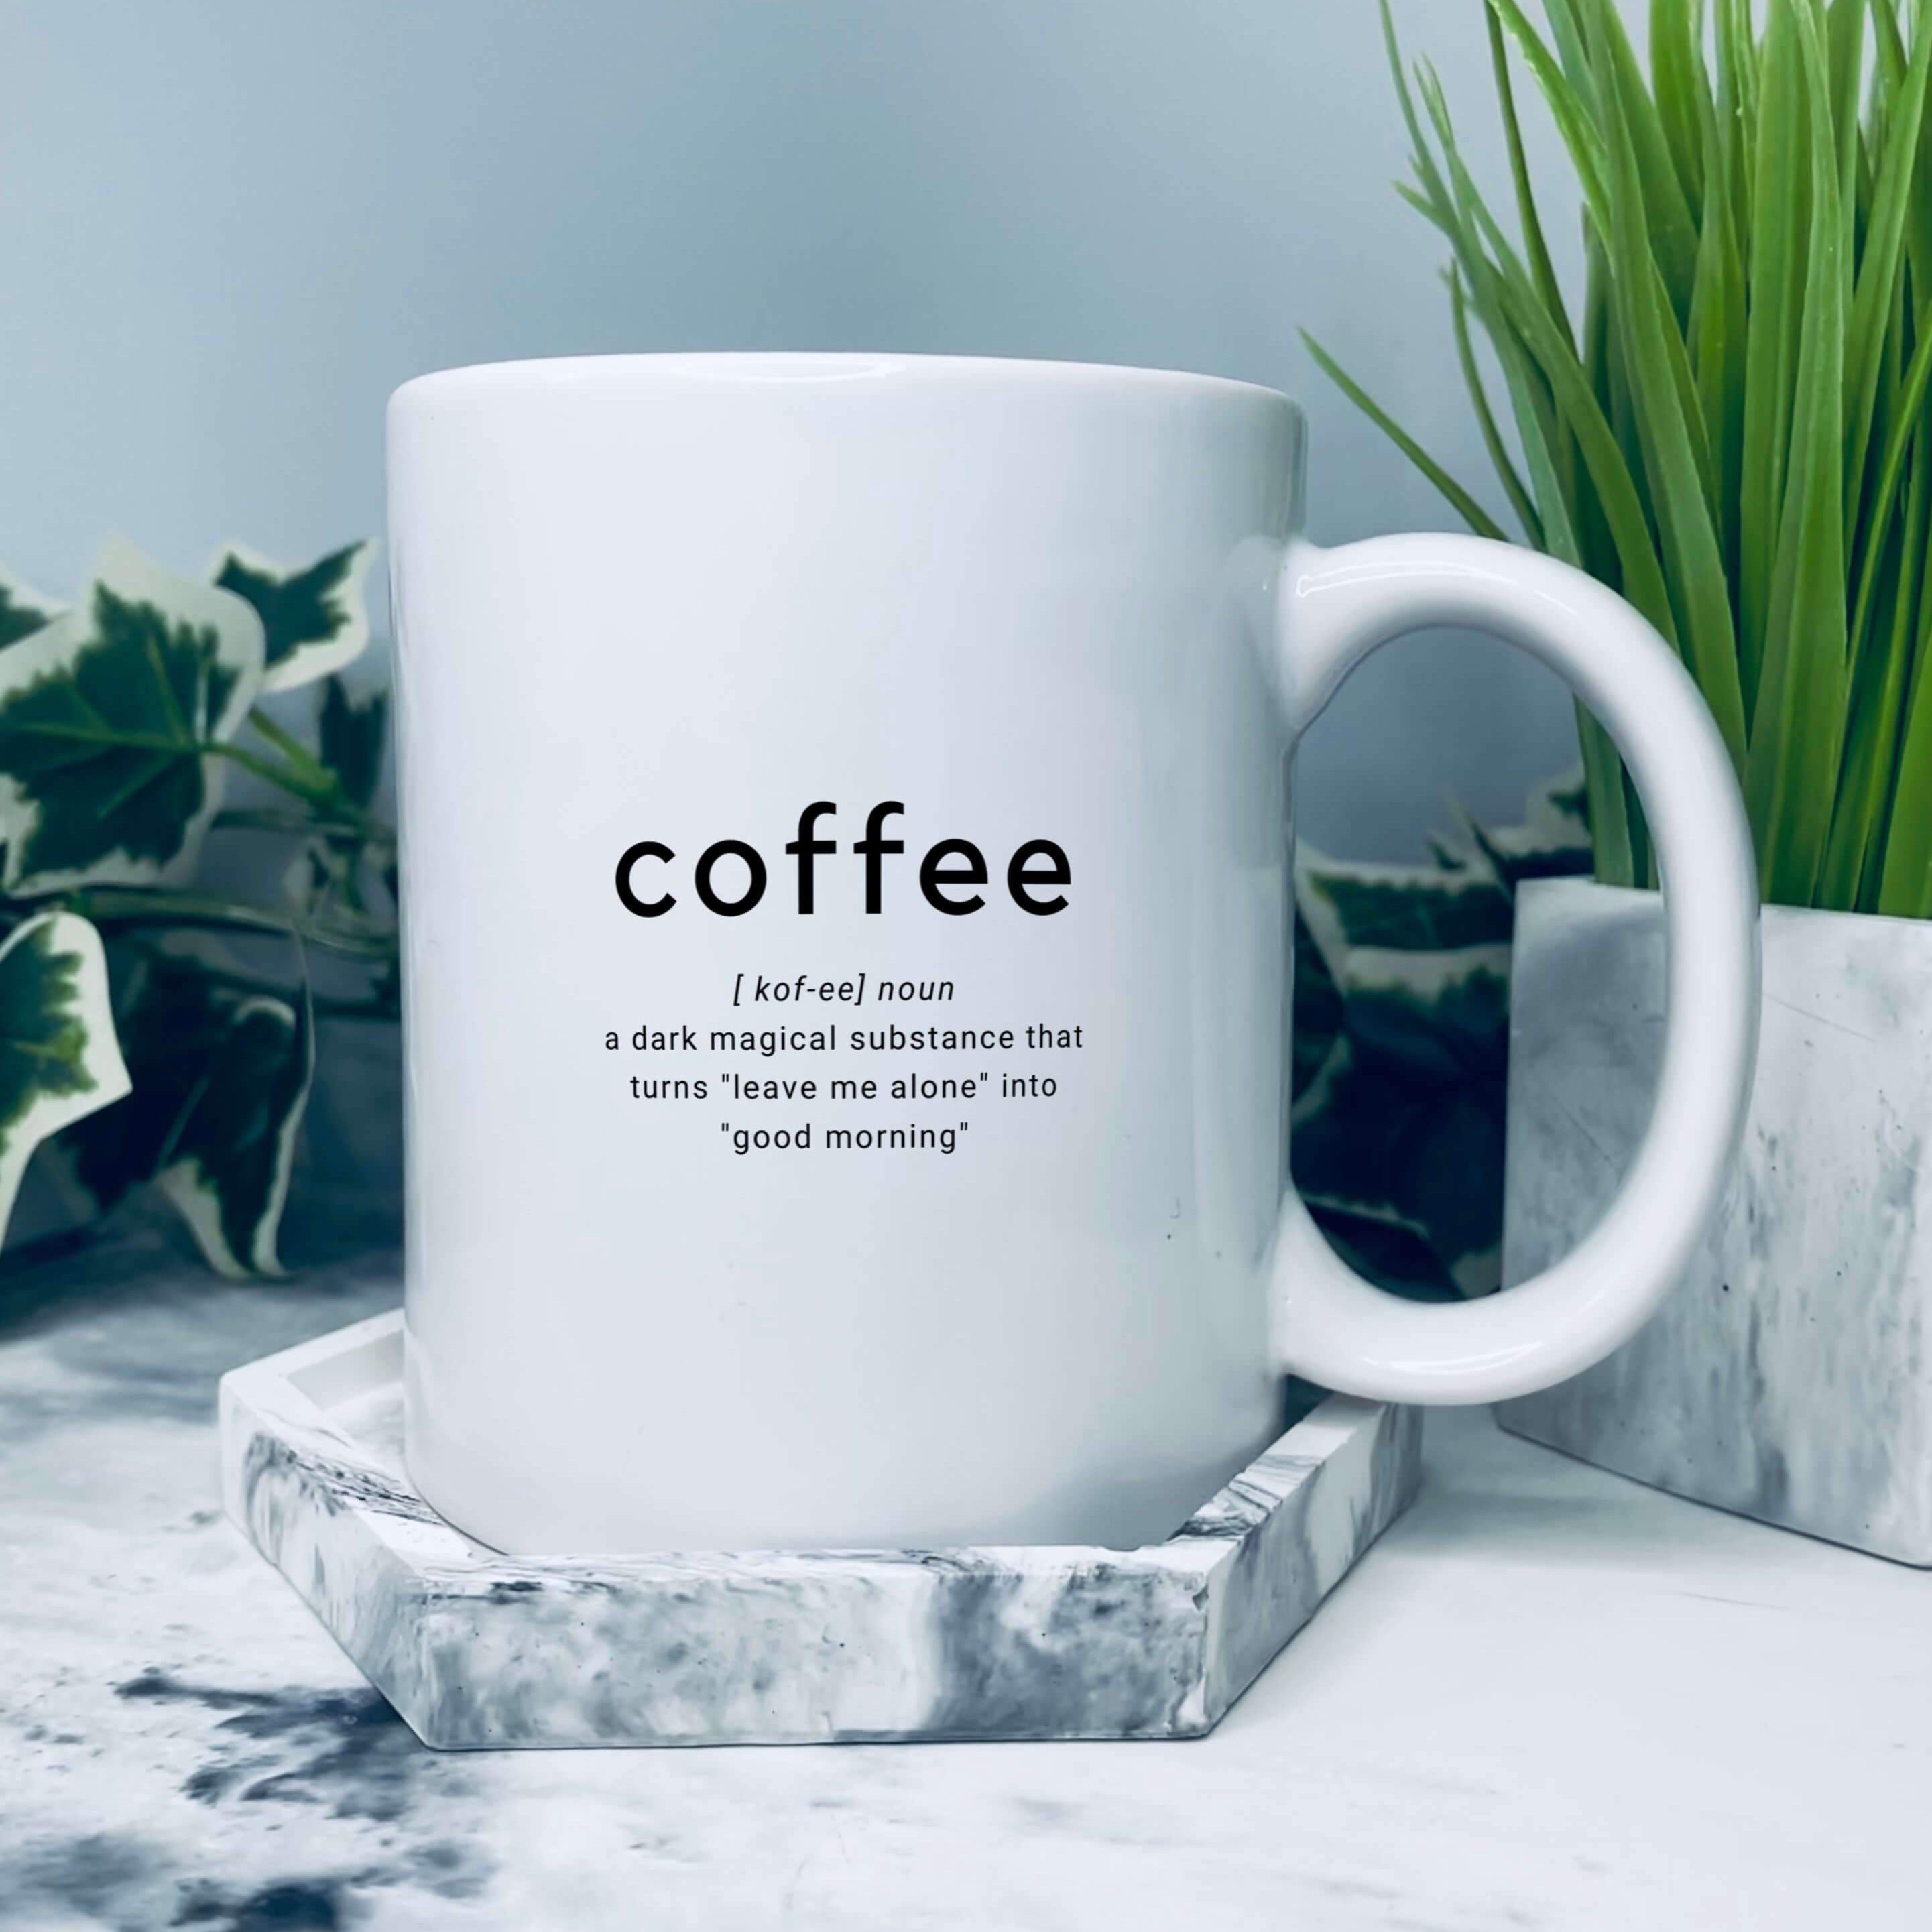 Coffee mug. Mug has coffee in larger text, with text underneath that says: a dark magical substance that turns leave me alone into good morning